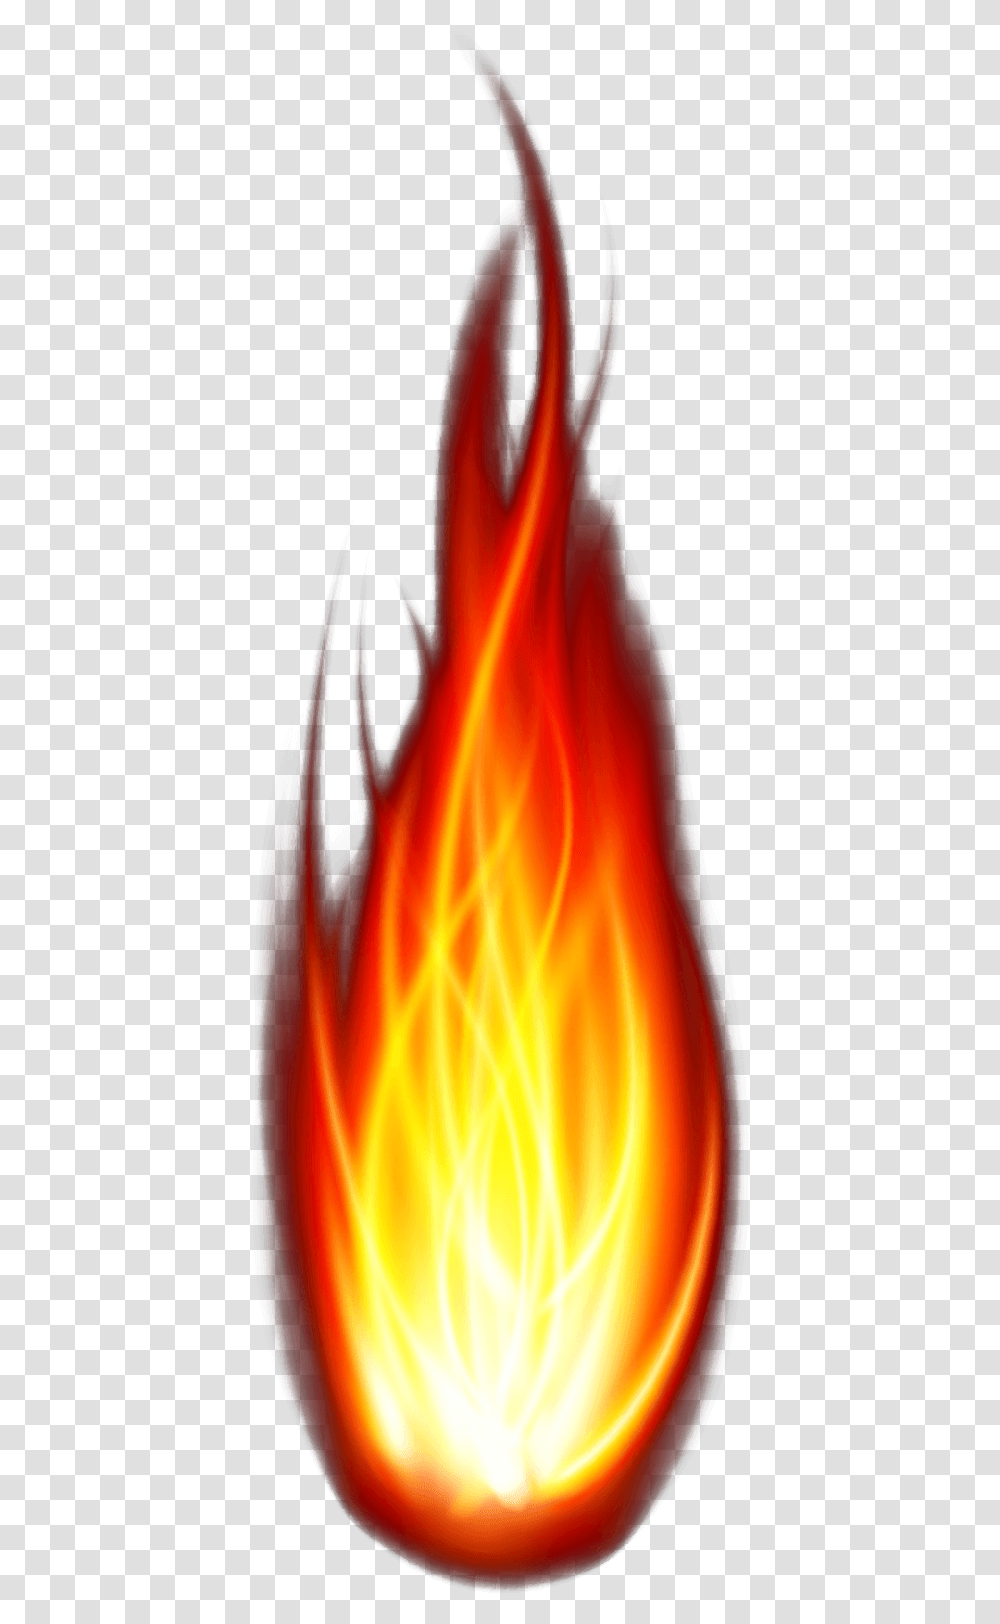 Fire Flame Image Free Download Searchpng Fire Cracker Fire Transparent Png